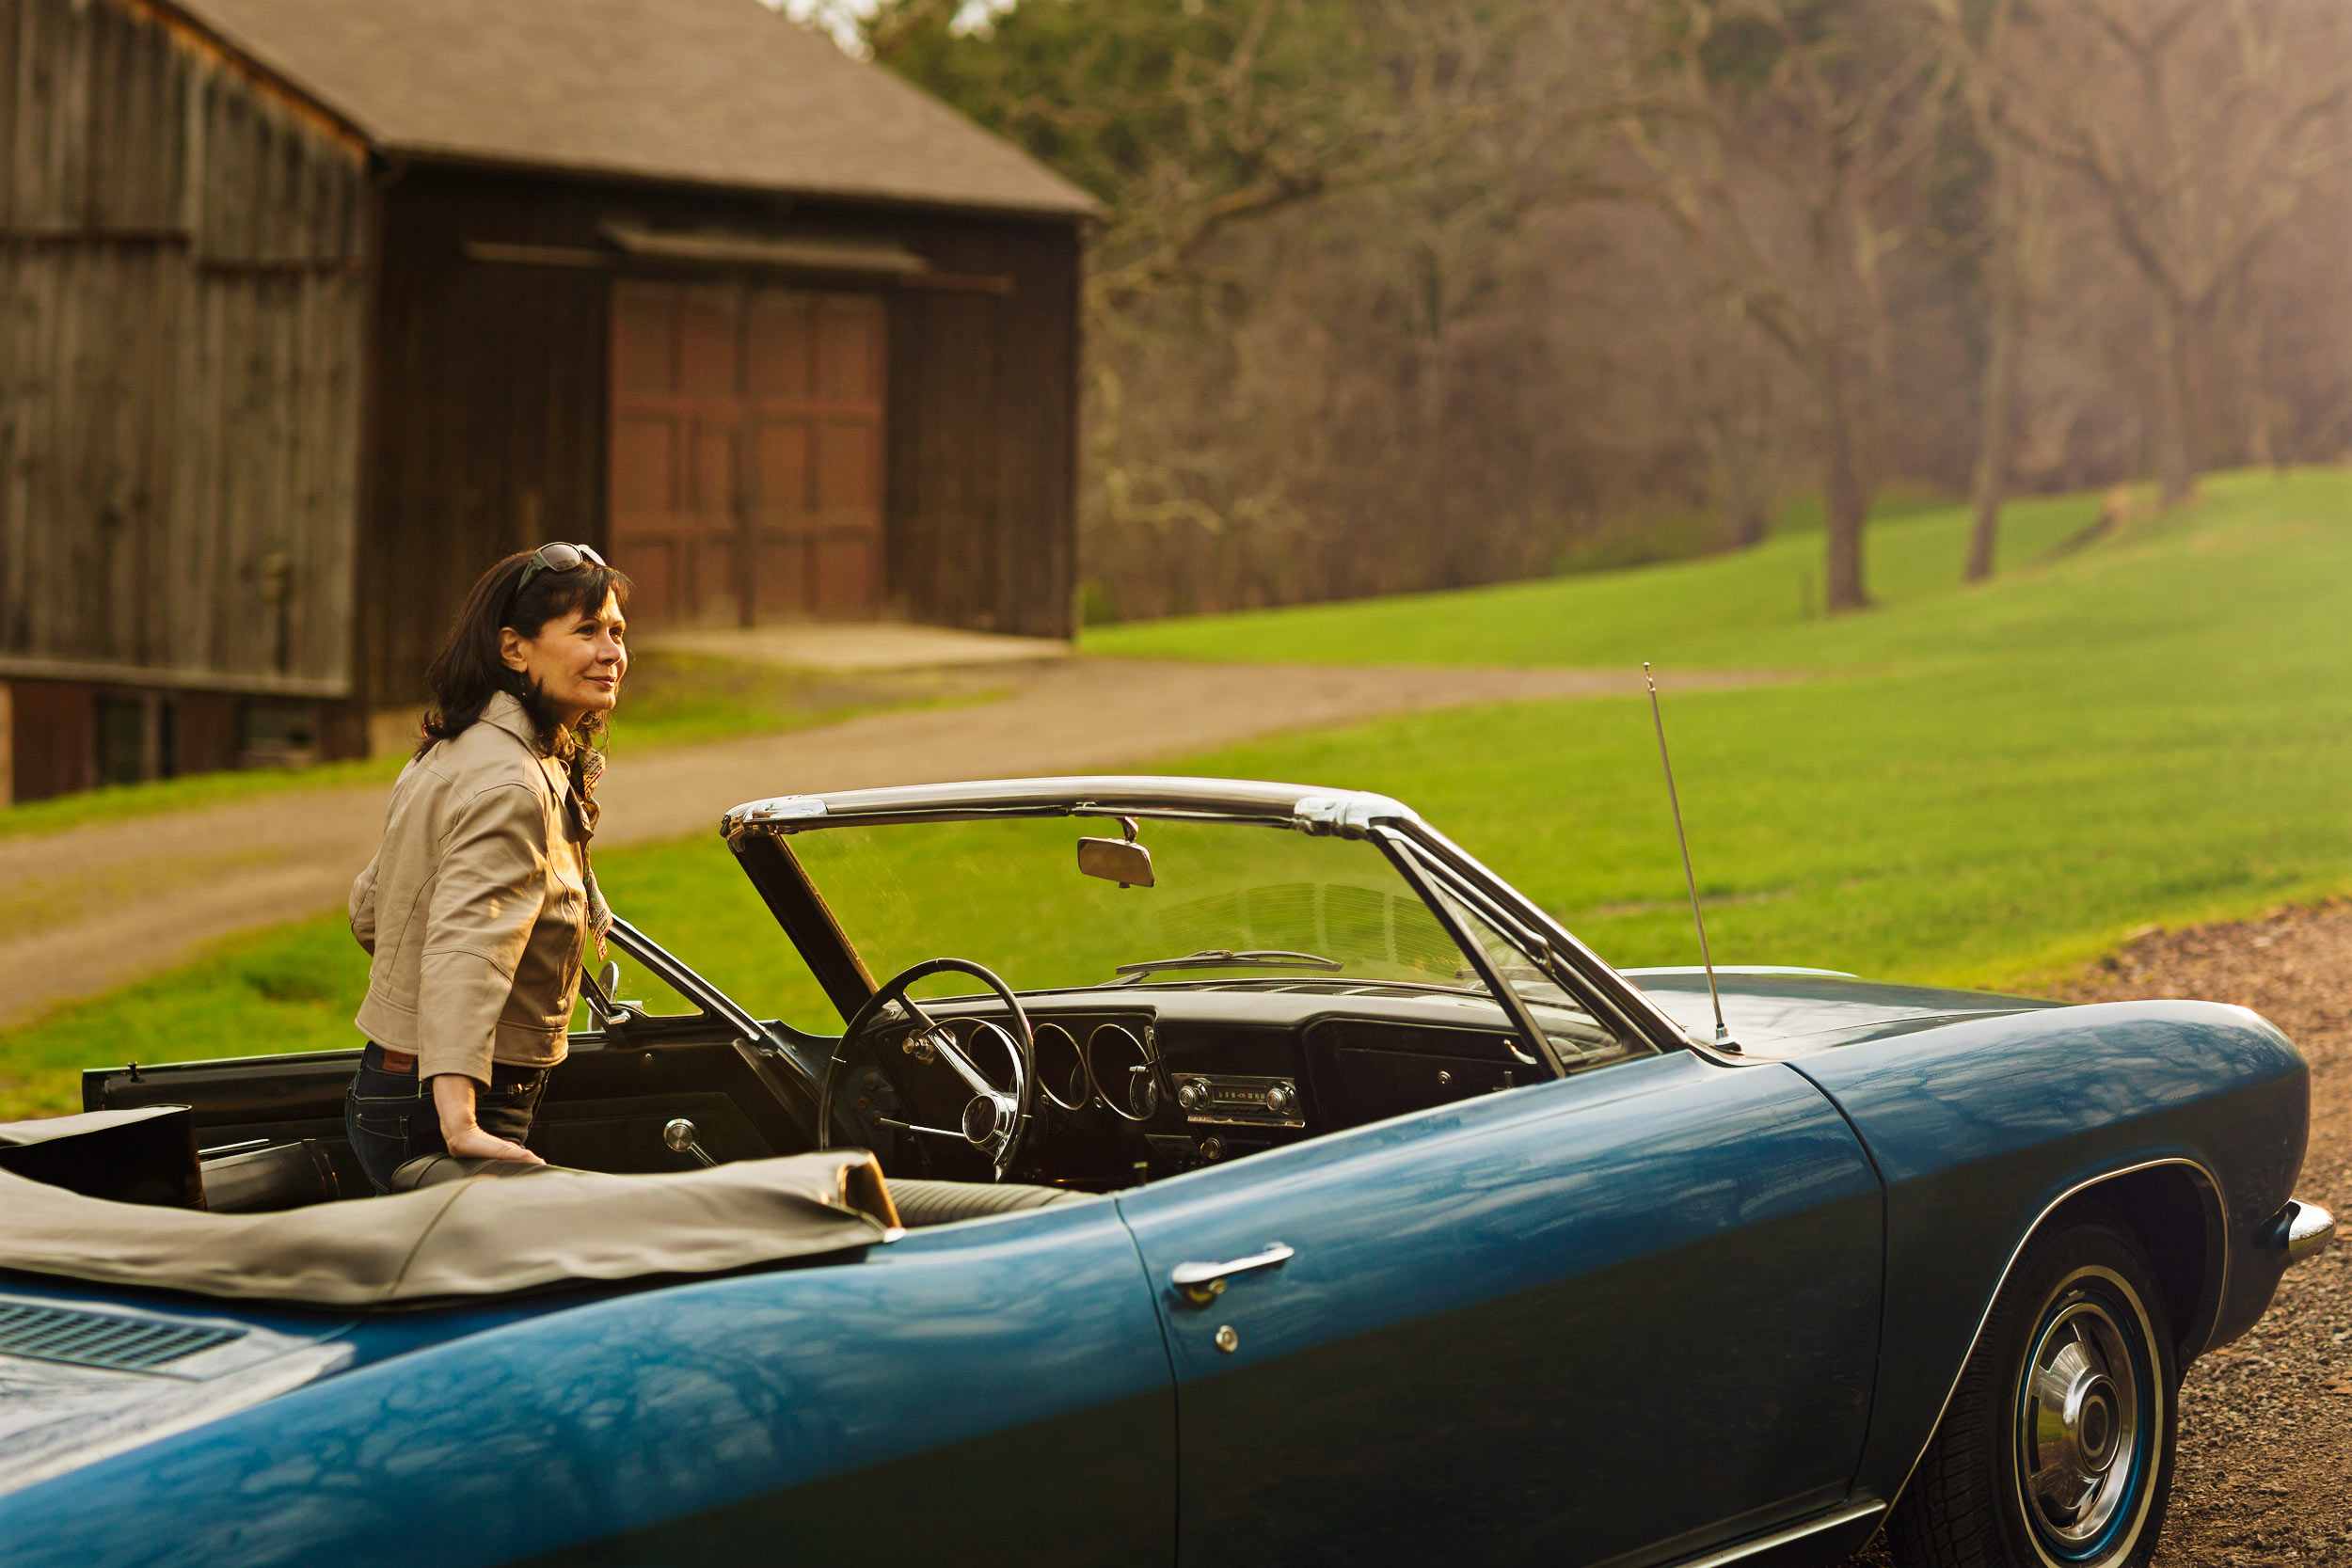 woman-getting-out-of-vintage-car-highmark-dc-commercial-photography-eli-meir-kaplan